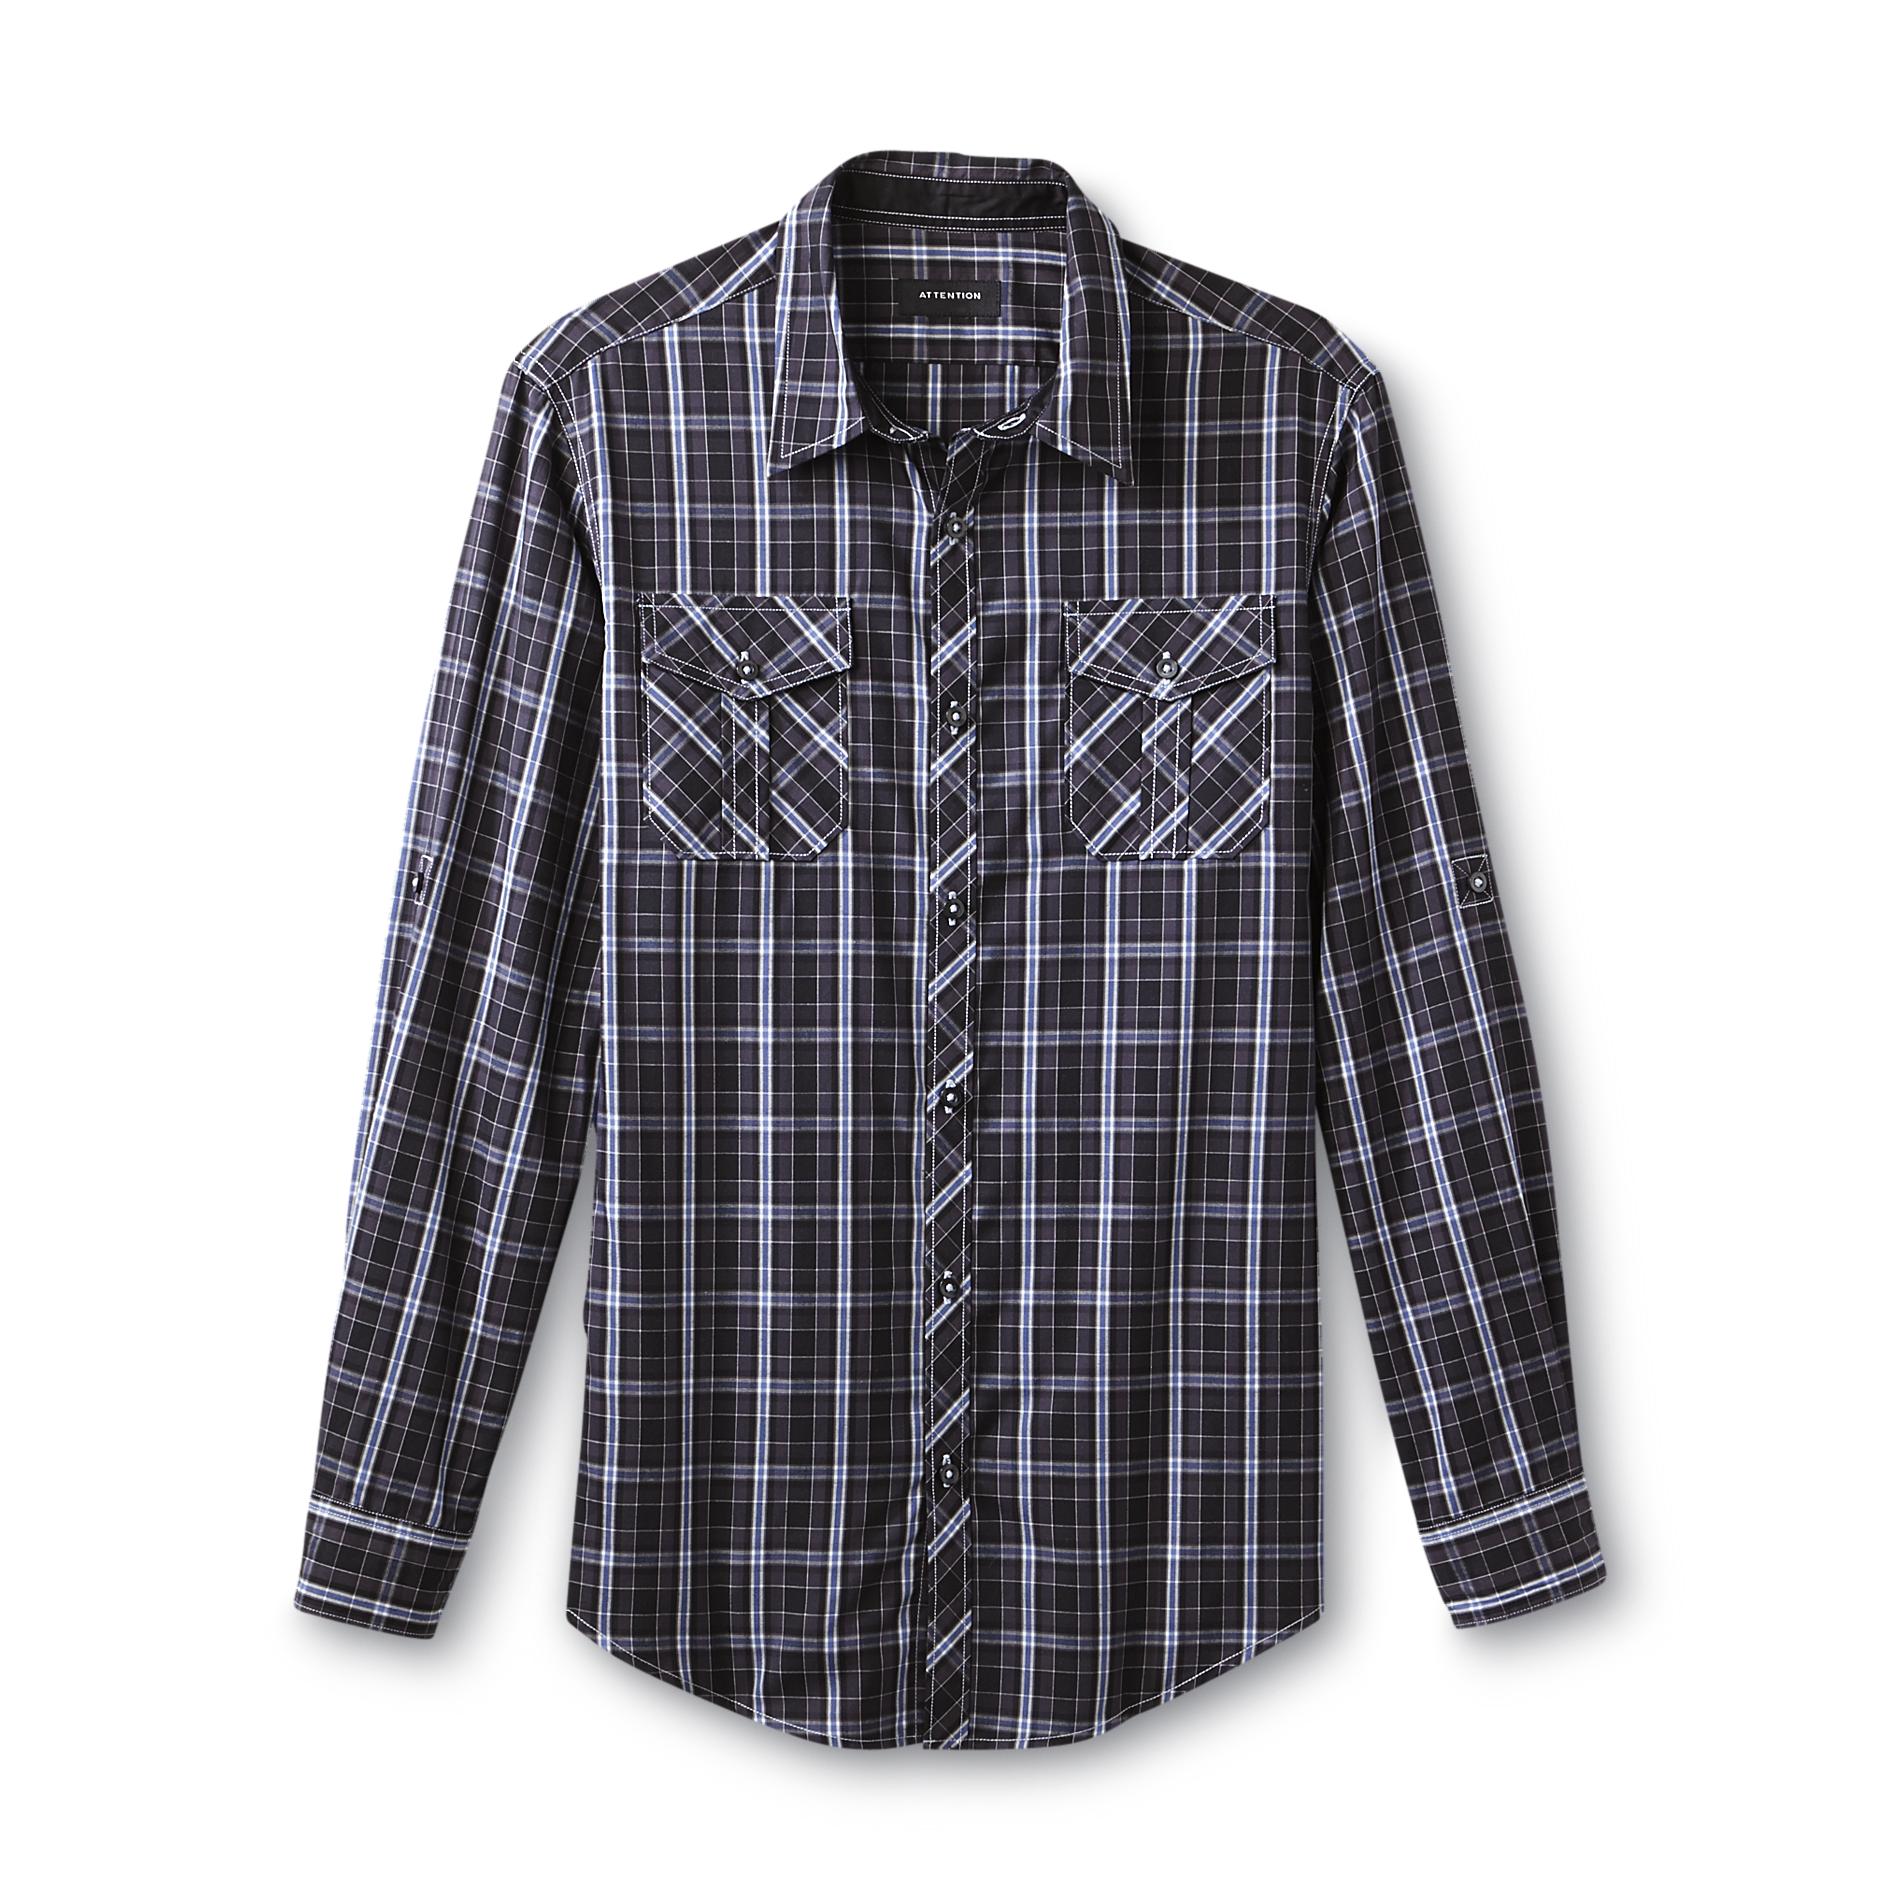 Attention Men's Collared Long-Sleeve Shirt